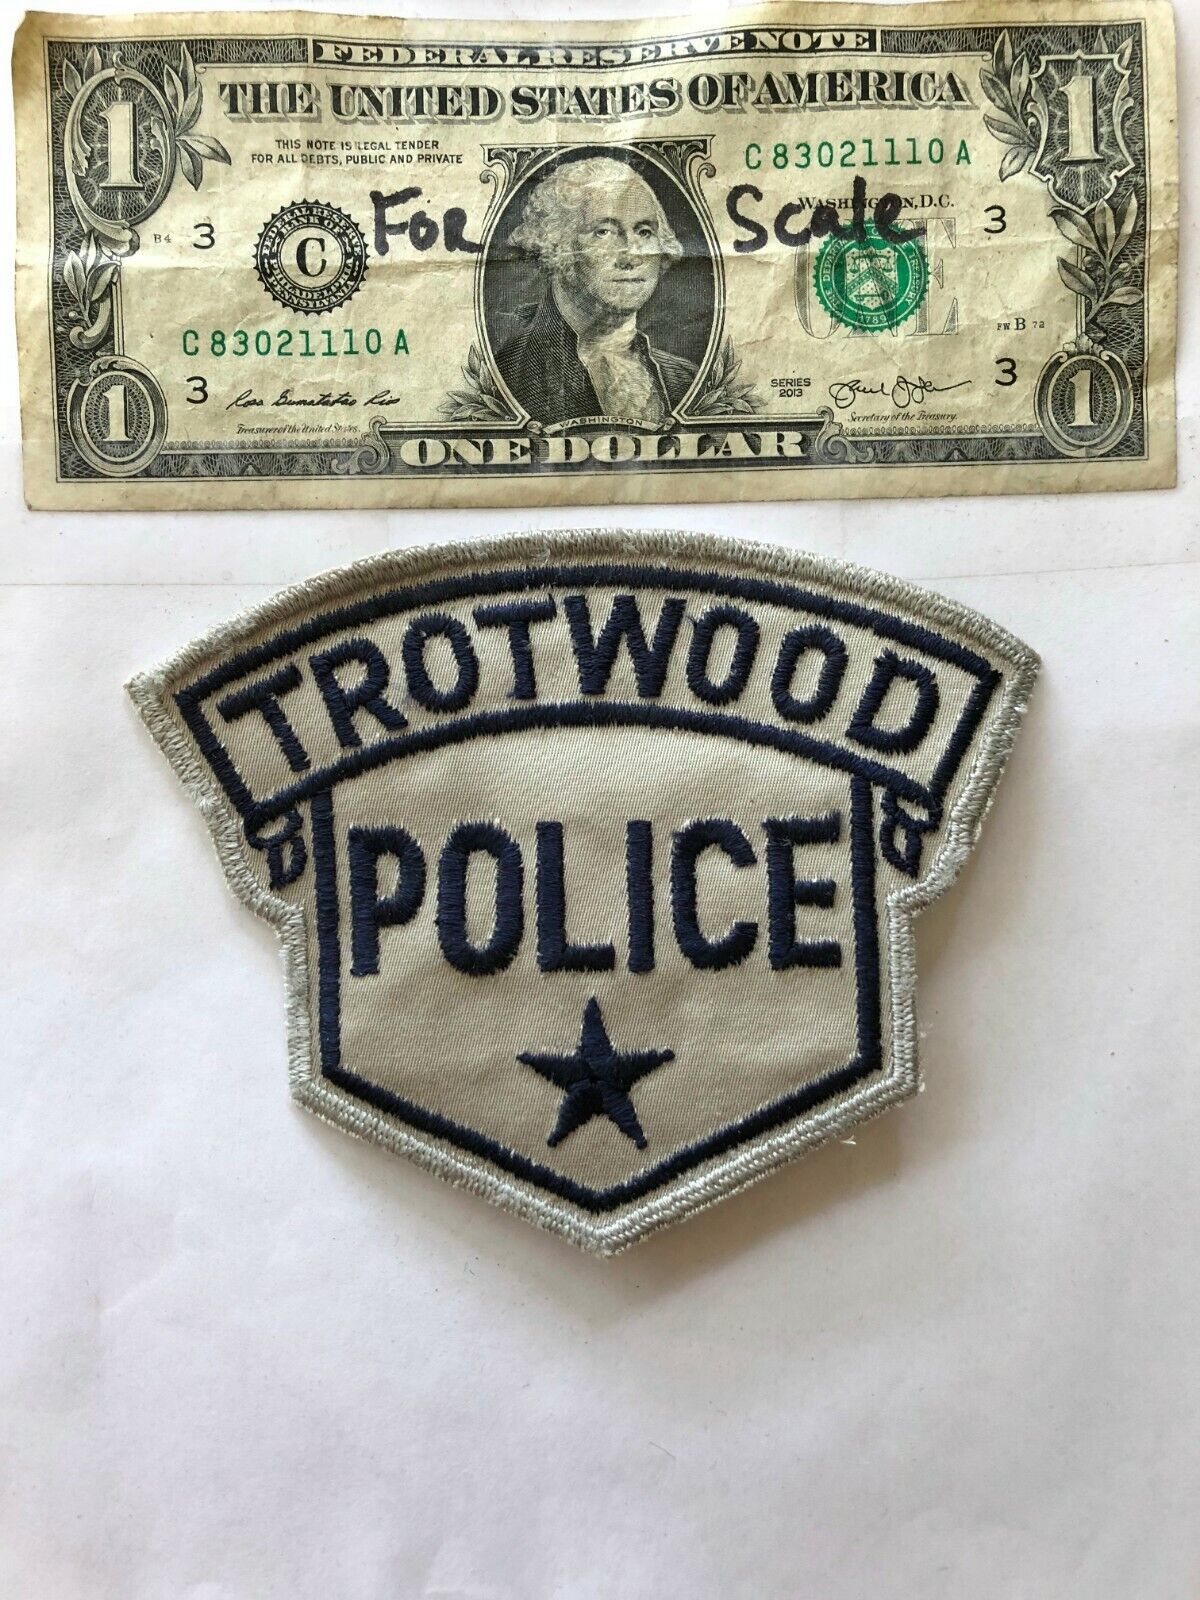 Trotwood Ohio Police Patch un-sewn in great shape 